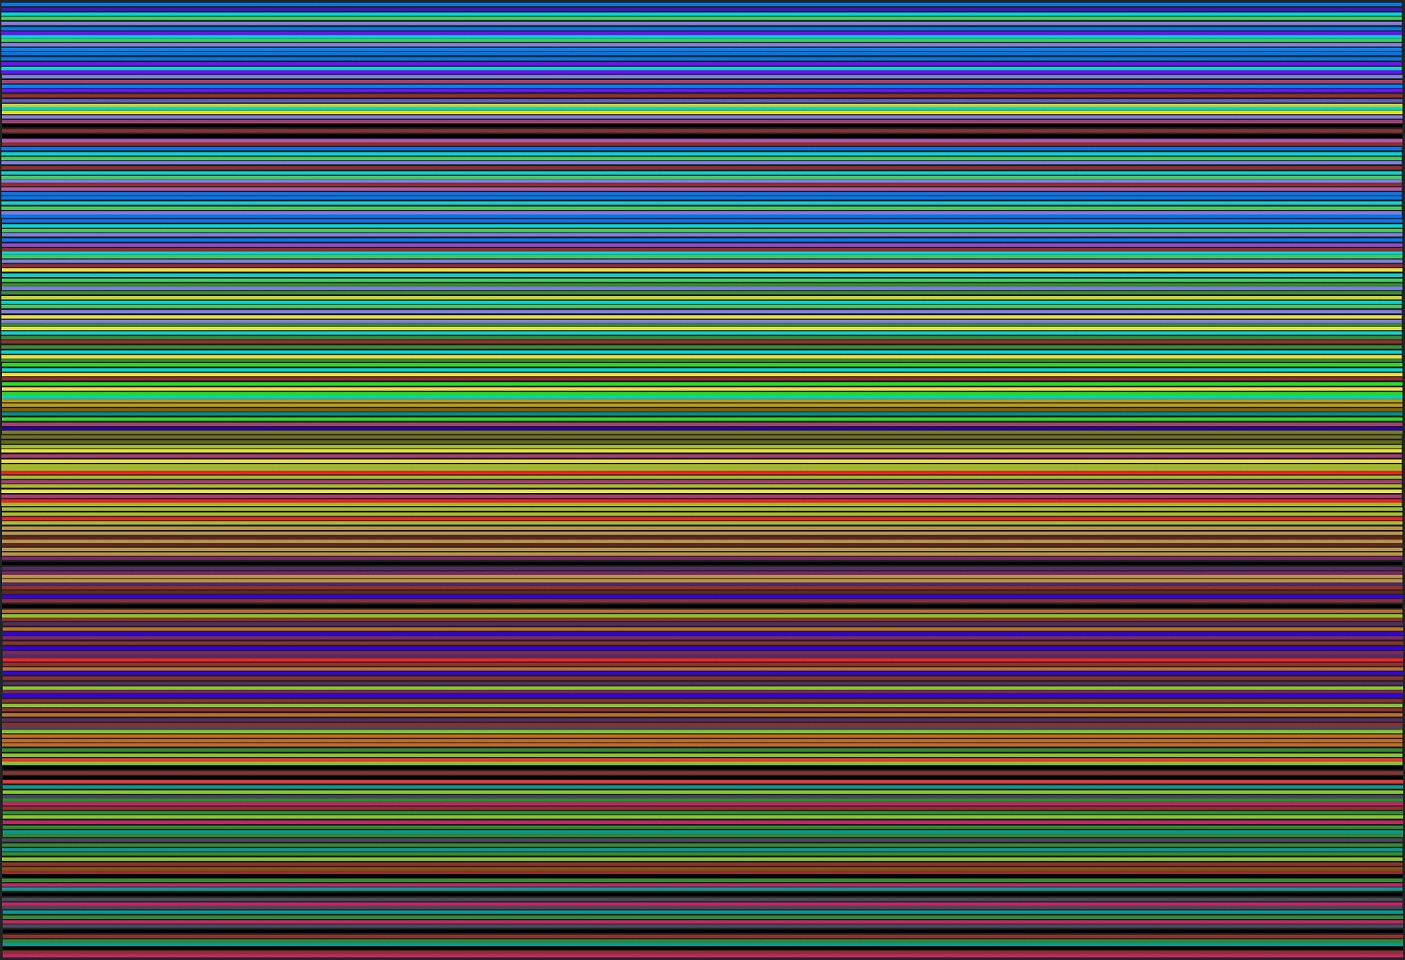 Dane Albert, Color Sticks #15 Night, 2023
Acrylic on canvas (Concept), 48 x 72 in. (121.9 x 182.9 cm)
Series of colored lines and shapes in multiple configurations
DA.2023.sticks-015-night